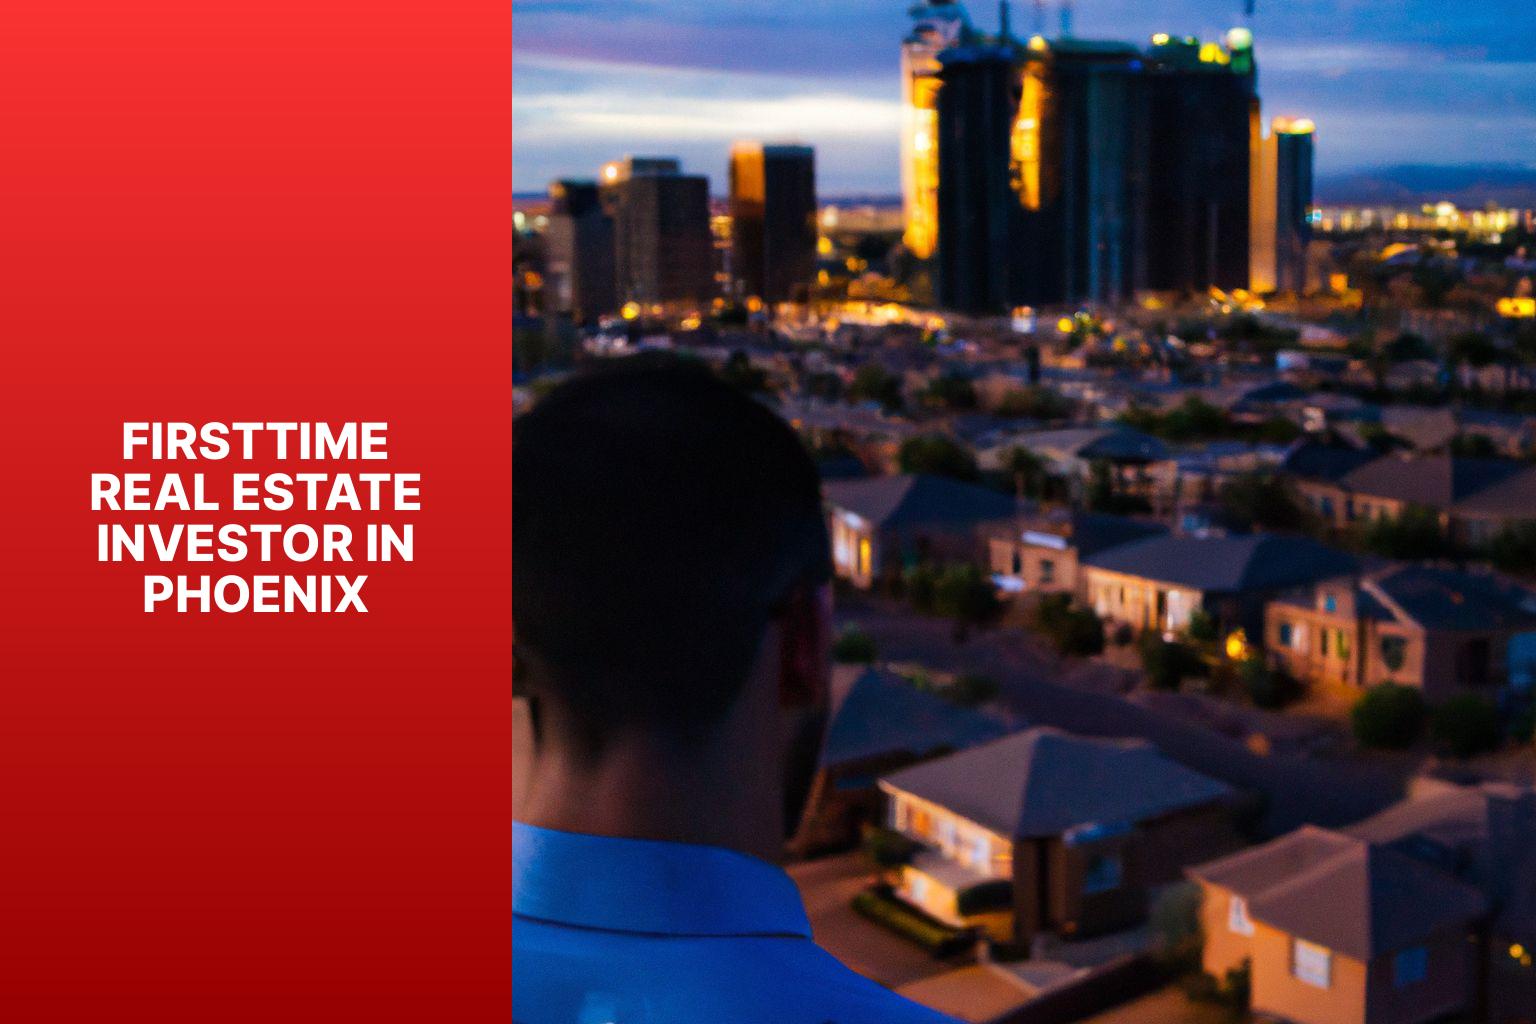 Firsttime real estate investor in Phoenix